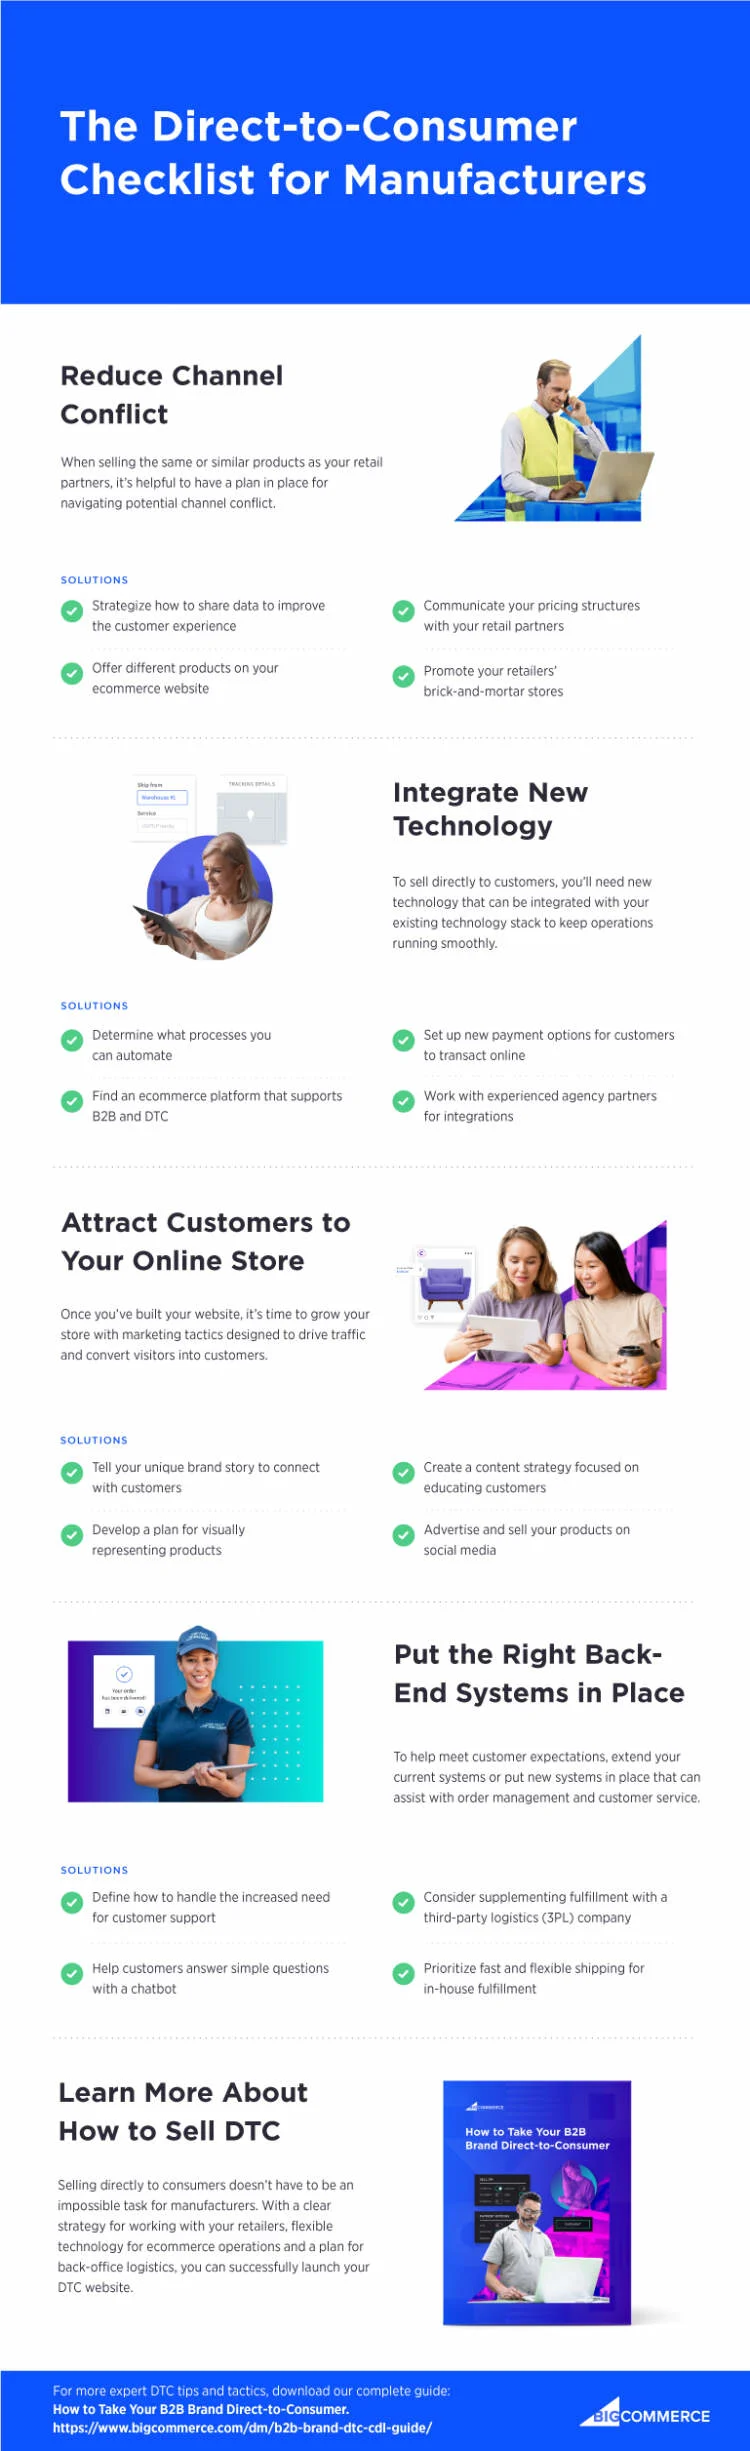 https://bcwpmktg.wpengine.com/wp-content/uploads/2021/02/The-Direct-to-Consumer-Checklist-for-Manufacturers_Infographic-750x2451.jpg